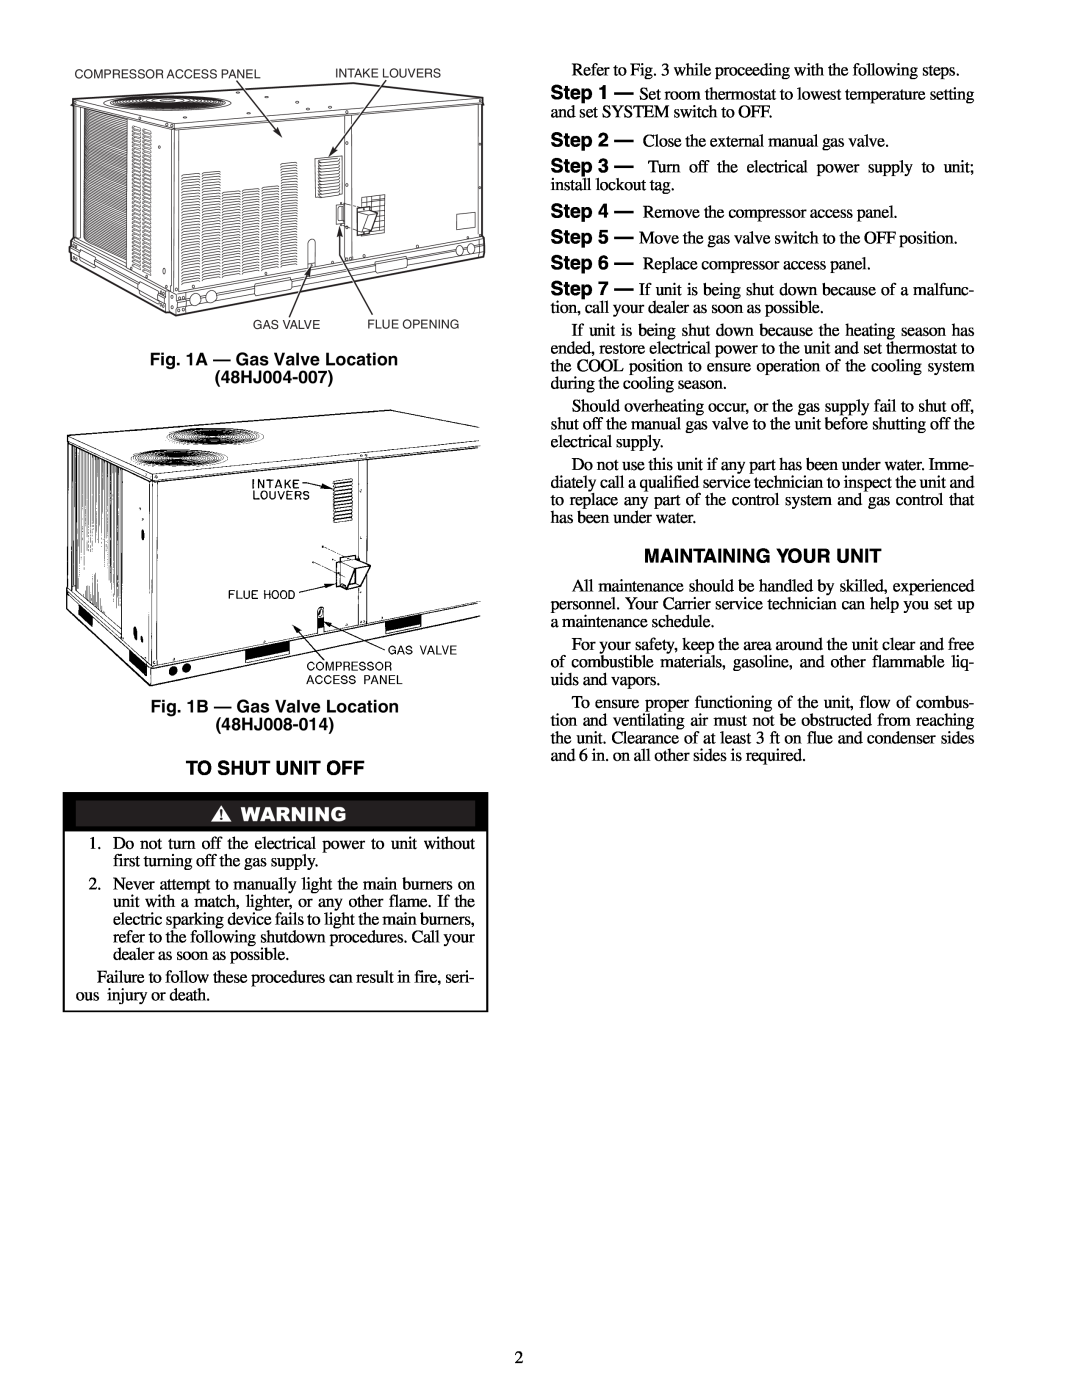 Carrier 48HJ004-014 specifications To Shut Unit Off, Maintaining Your Unit, A - Gas Valve Location 48HJ004-007 